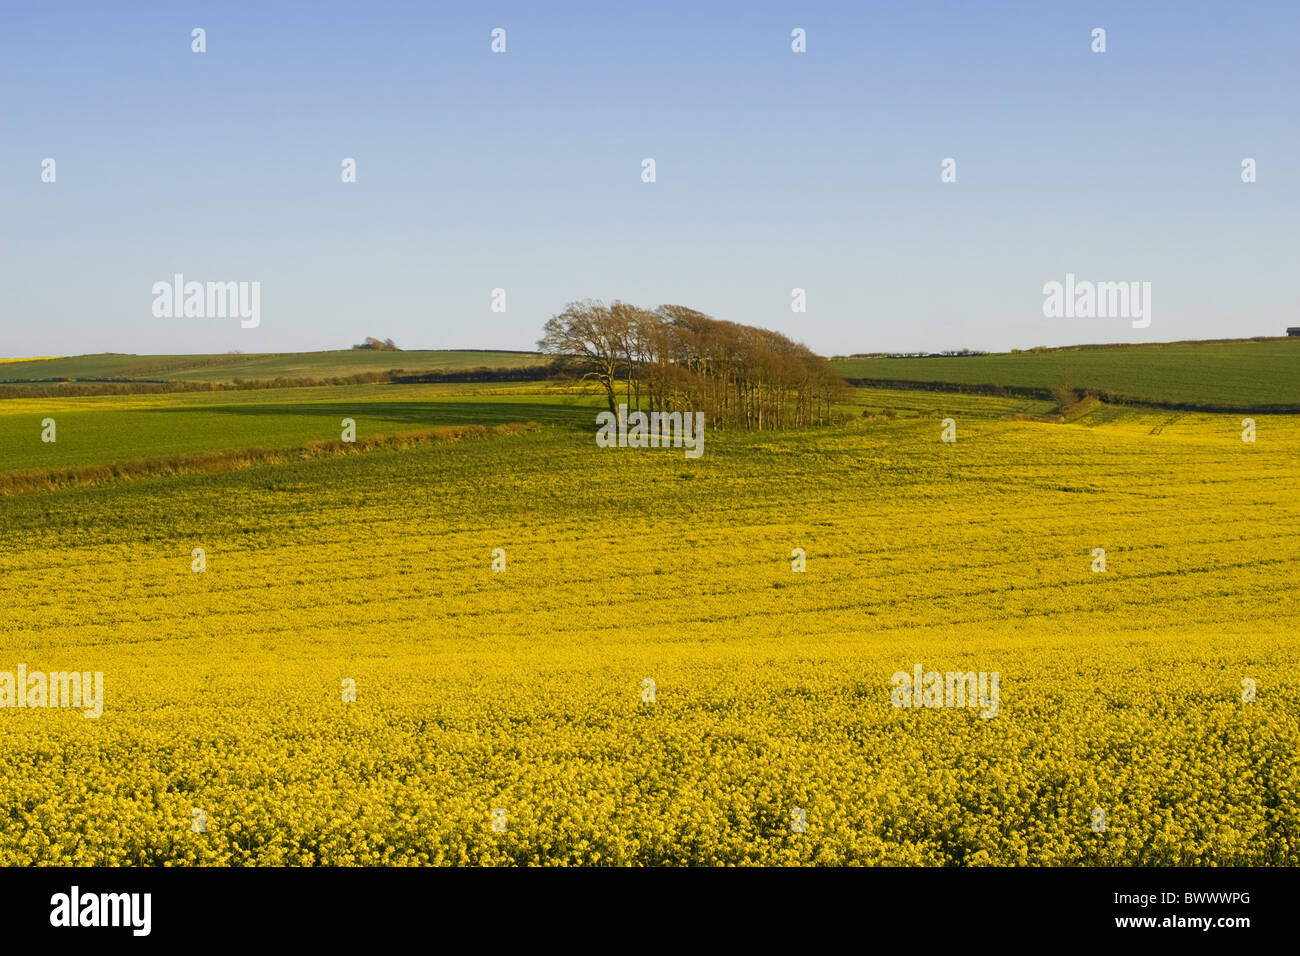 Agriculture Agricultural Agricultures April Bloom Blooms Brassica Canola Crop Crops Cruciferae Cultivate Cultivates Dorset Stock Photo